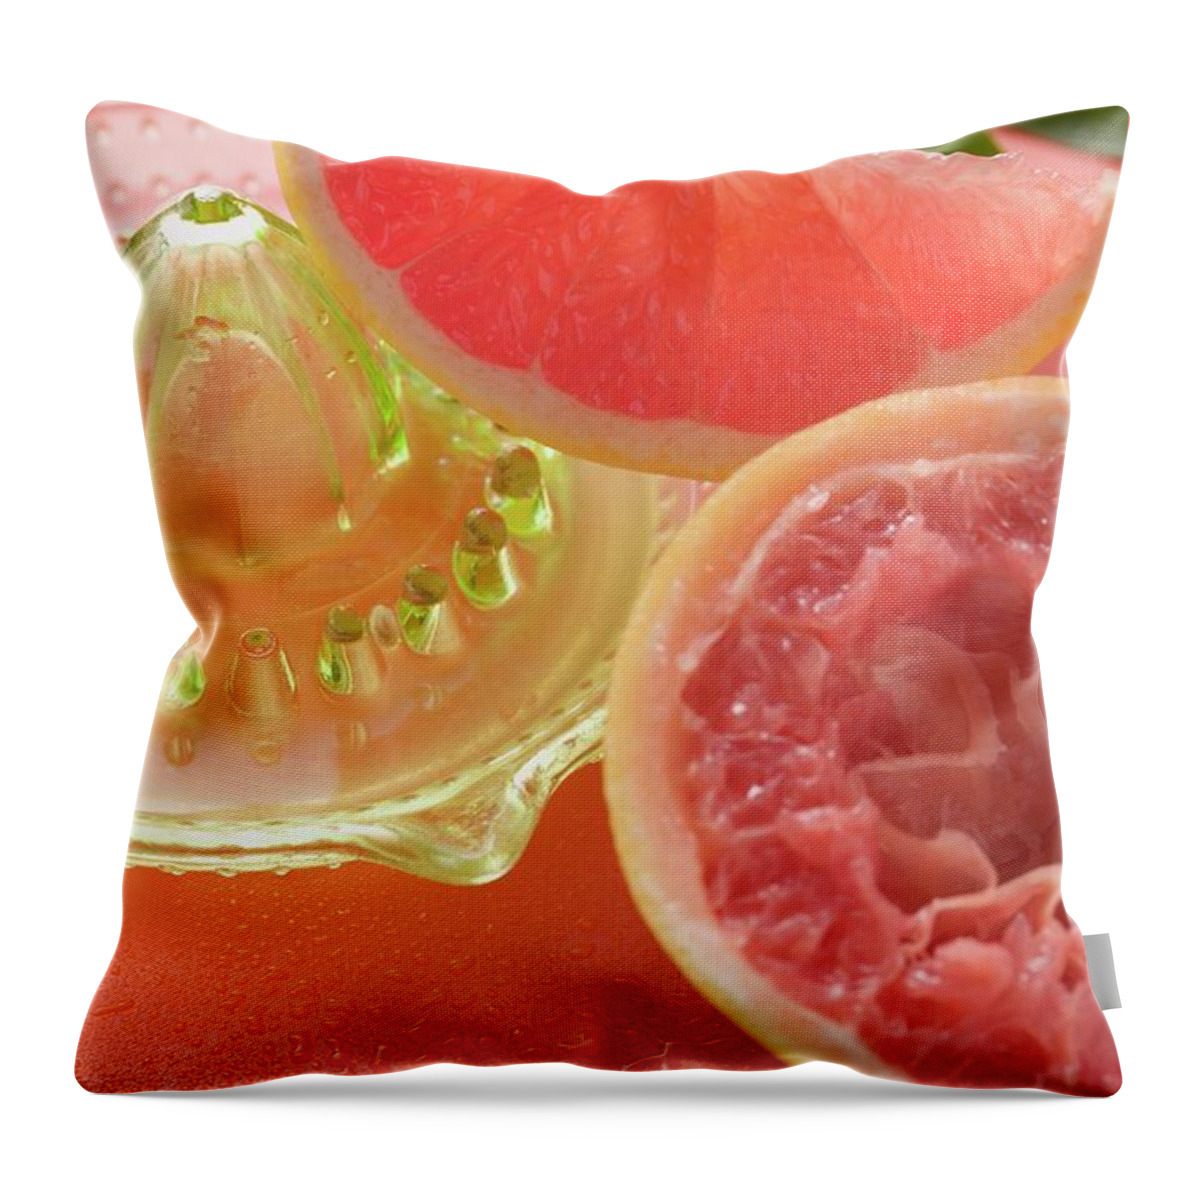 Being Squeezed Throw Pillow featuring the photograph Pink Grapefruit Wedge, Squeezed Grapefruit, Citrus Squeezer by Foodcollection